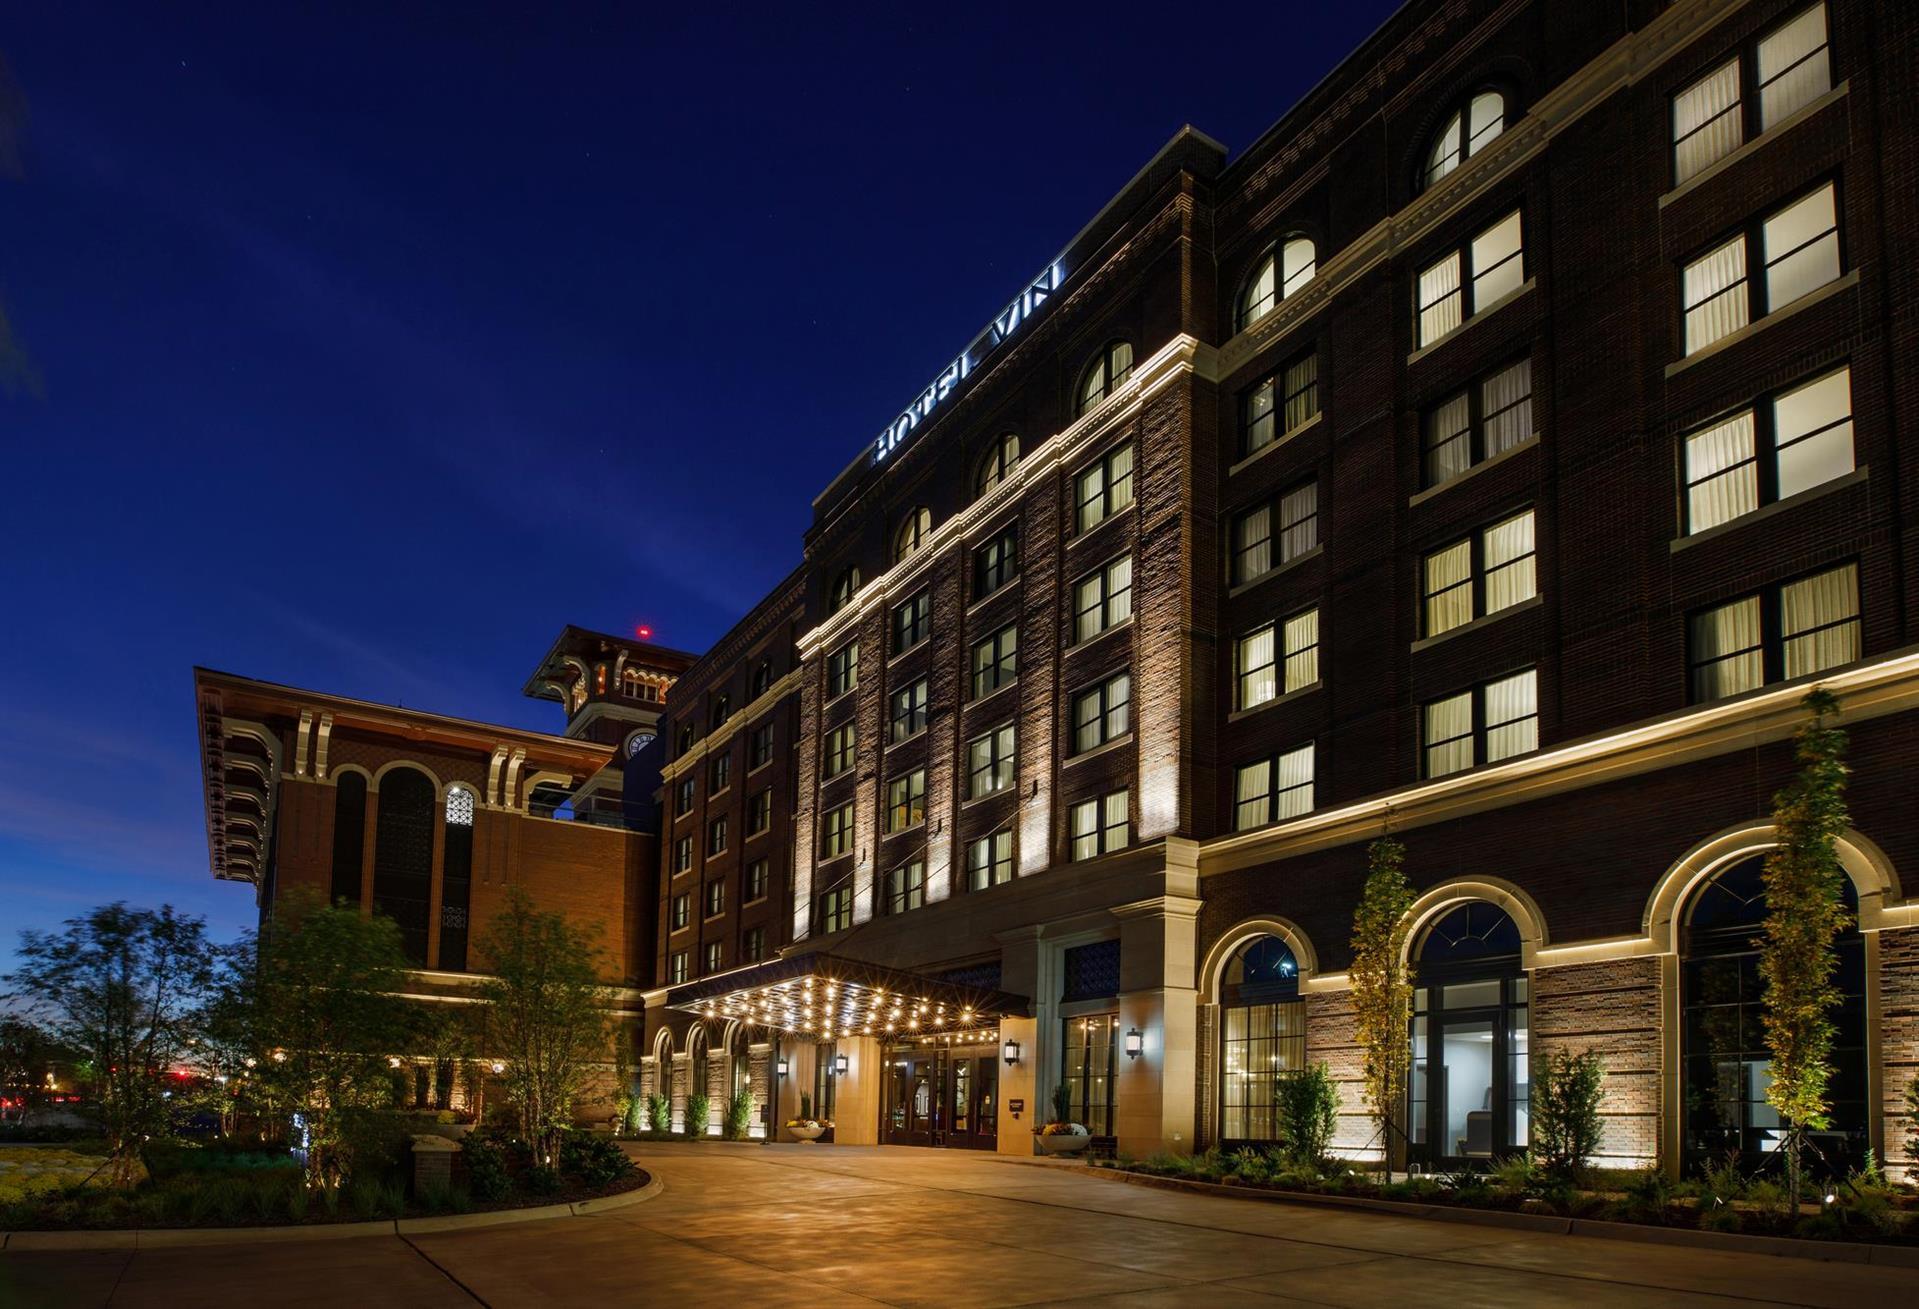 Hotel Vin, Autograph Collection in Grapevine, TX